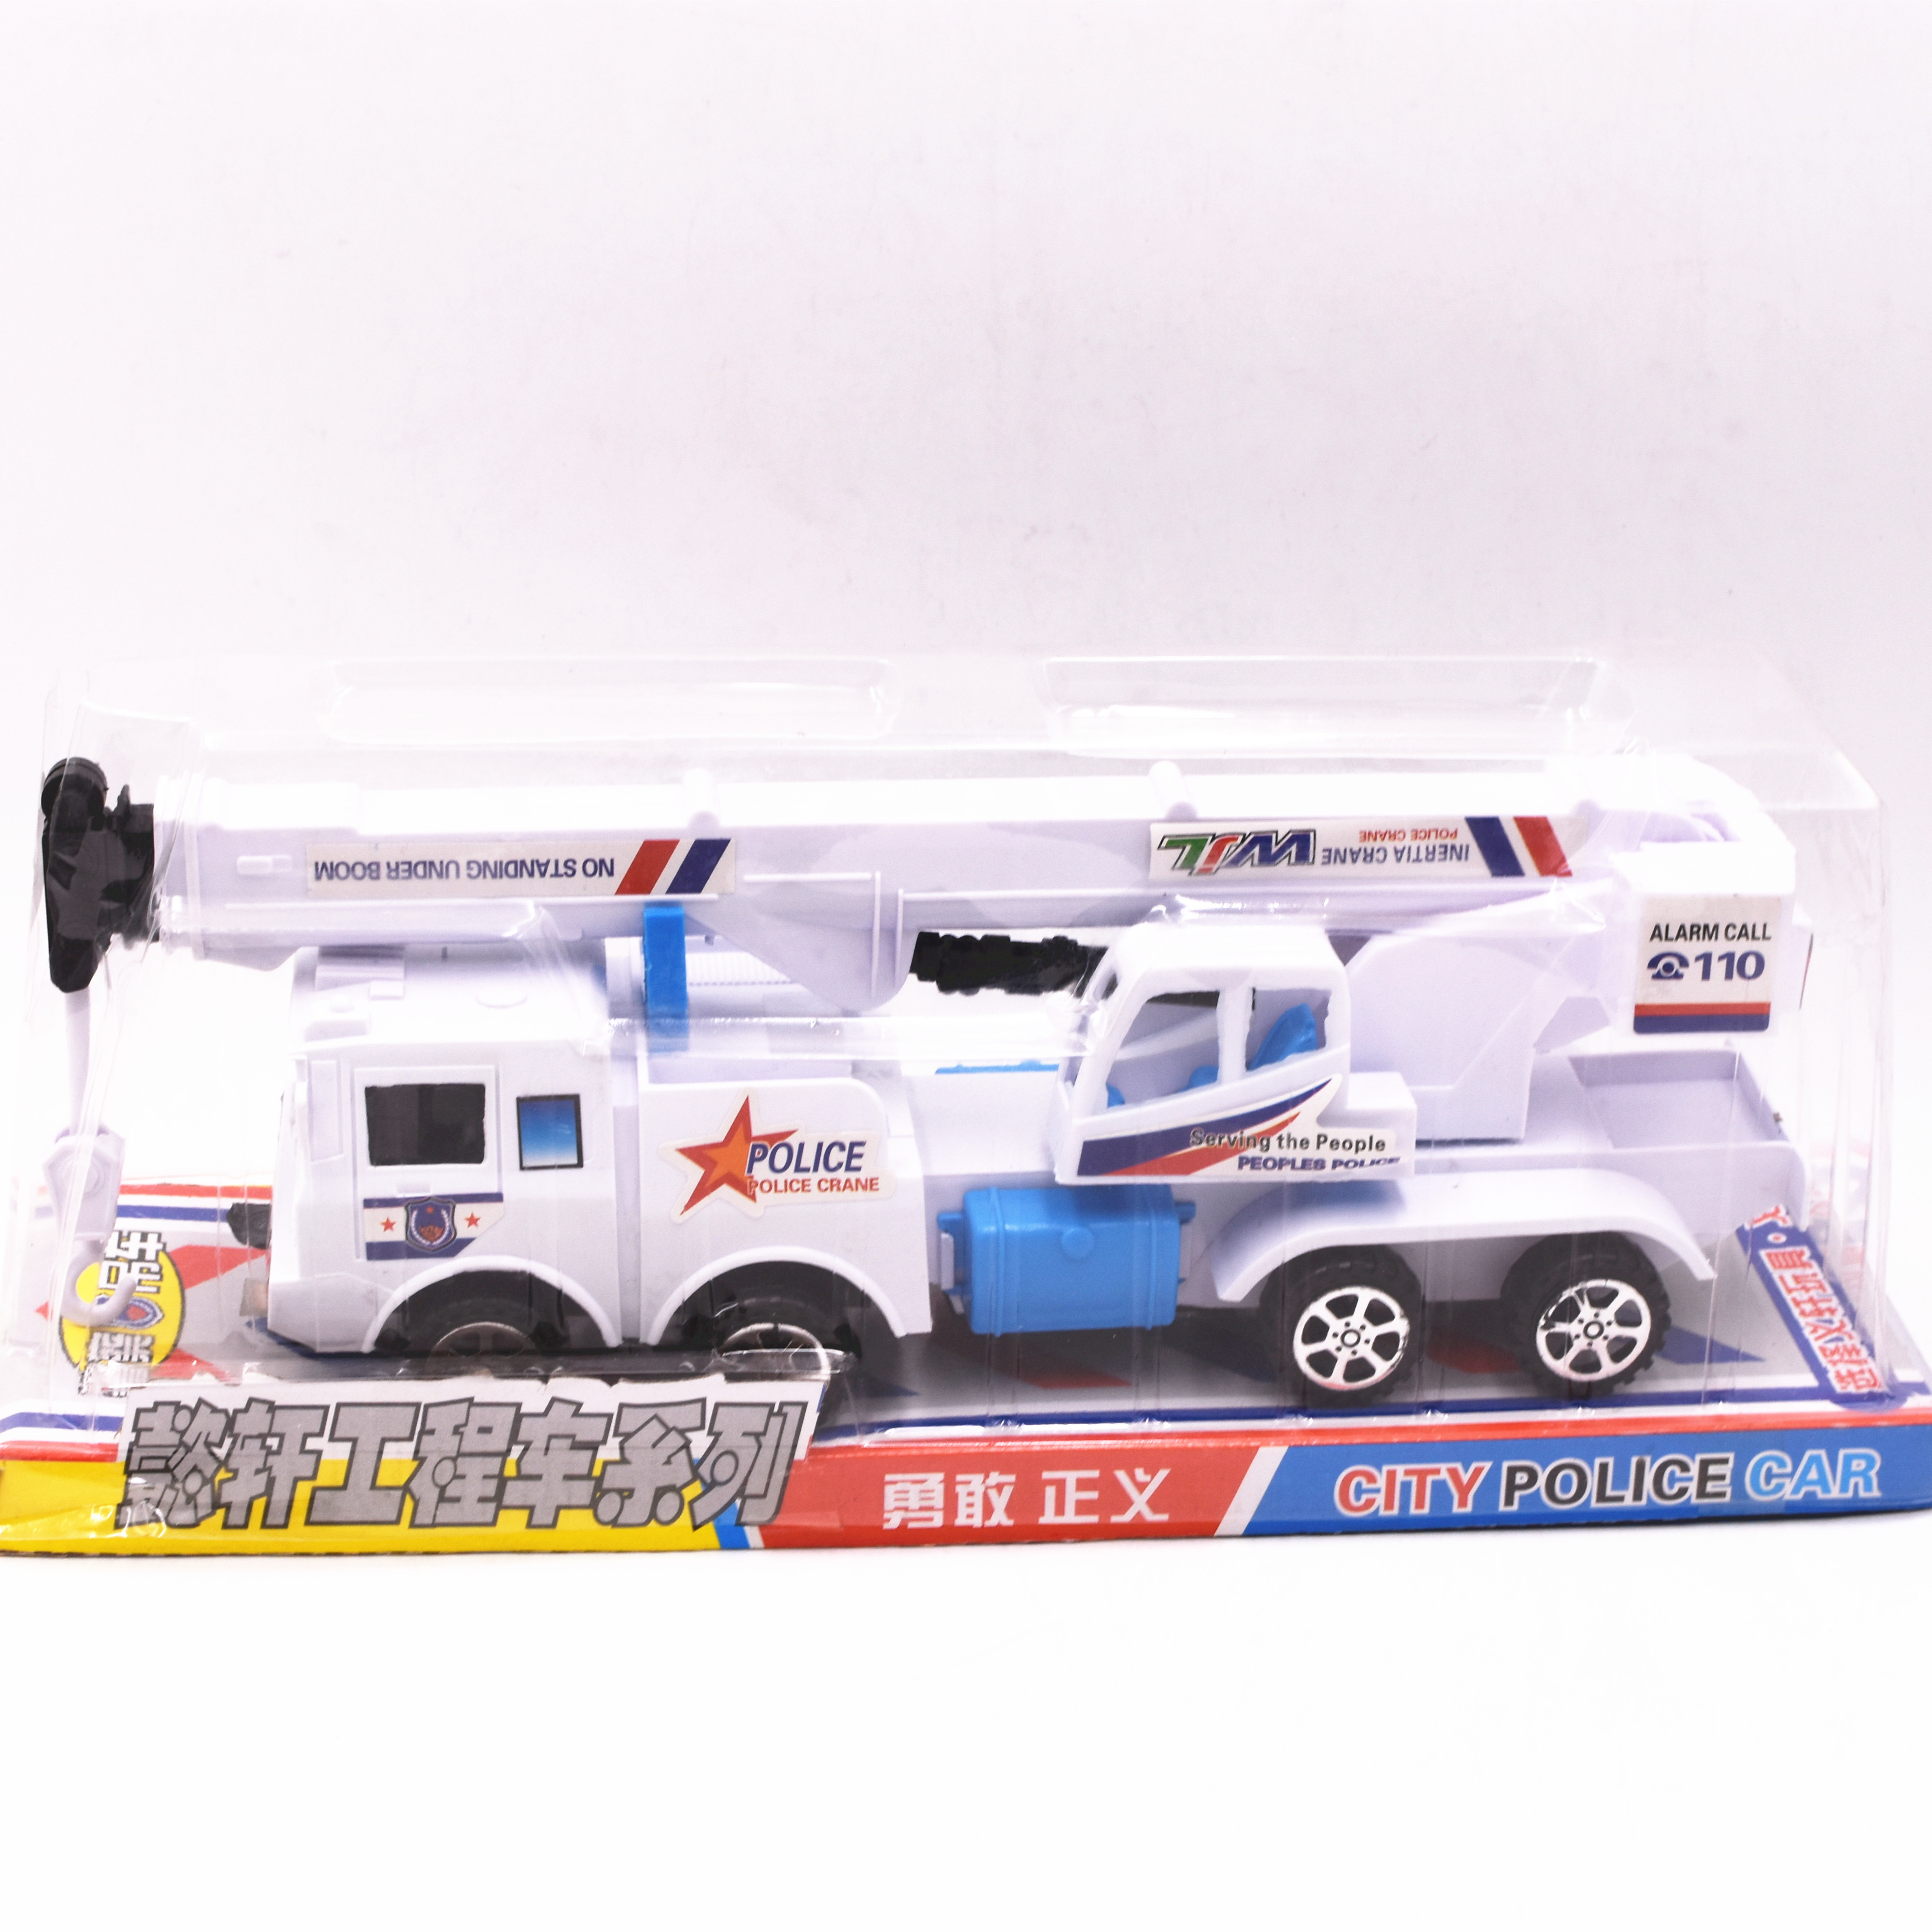 FREE WHEEL TRUCK TOY LY1775